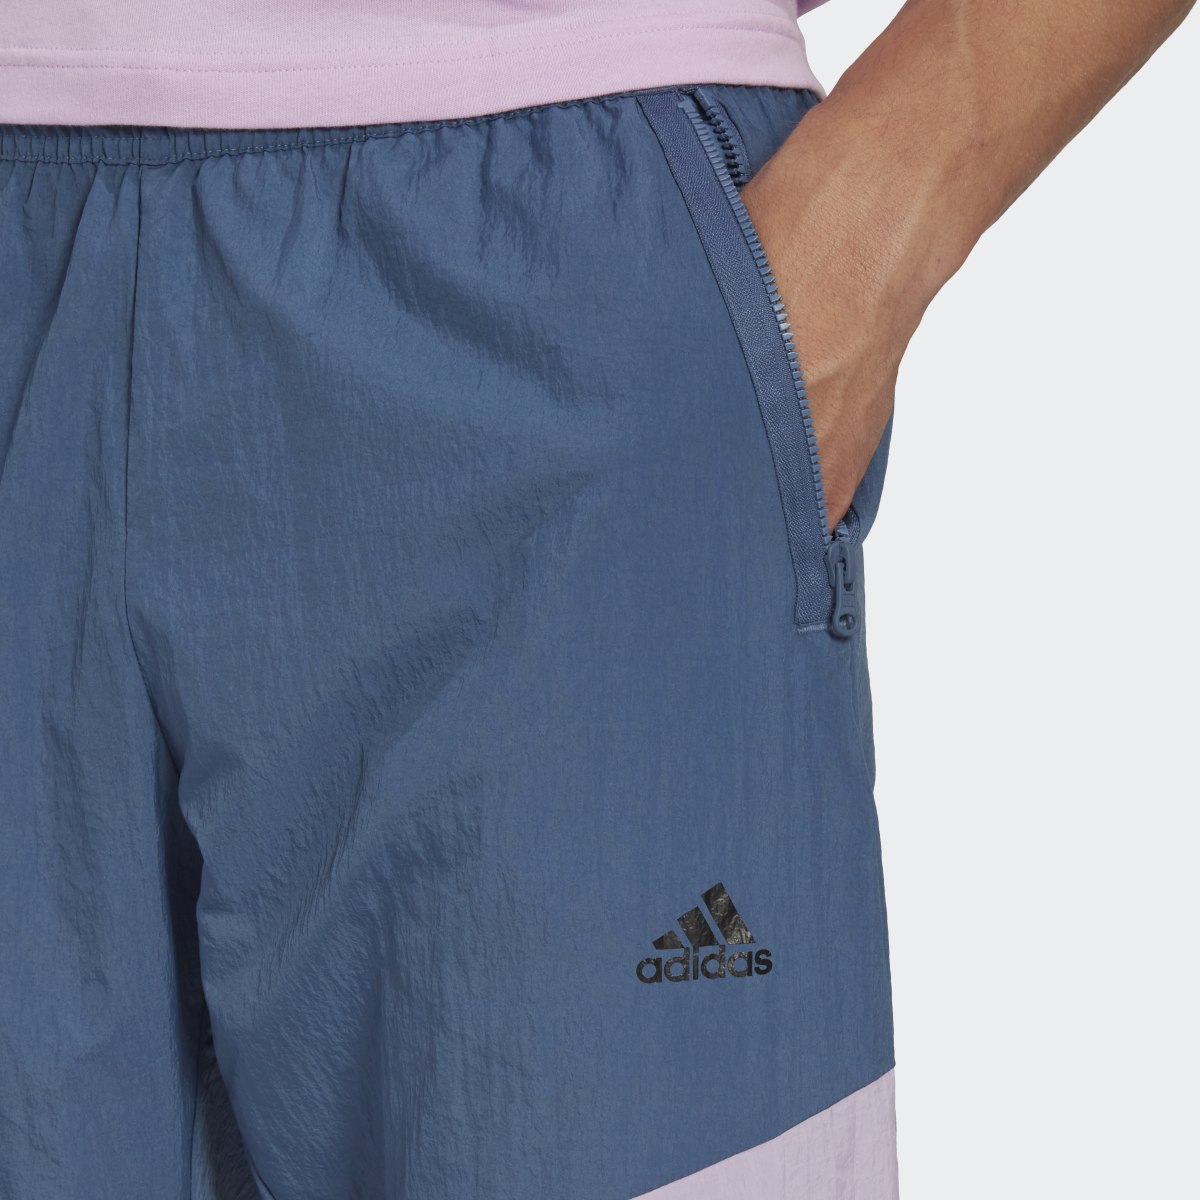 Adidas Future Icons 3-Stripes Woven Tracksuit Bottoms. 5